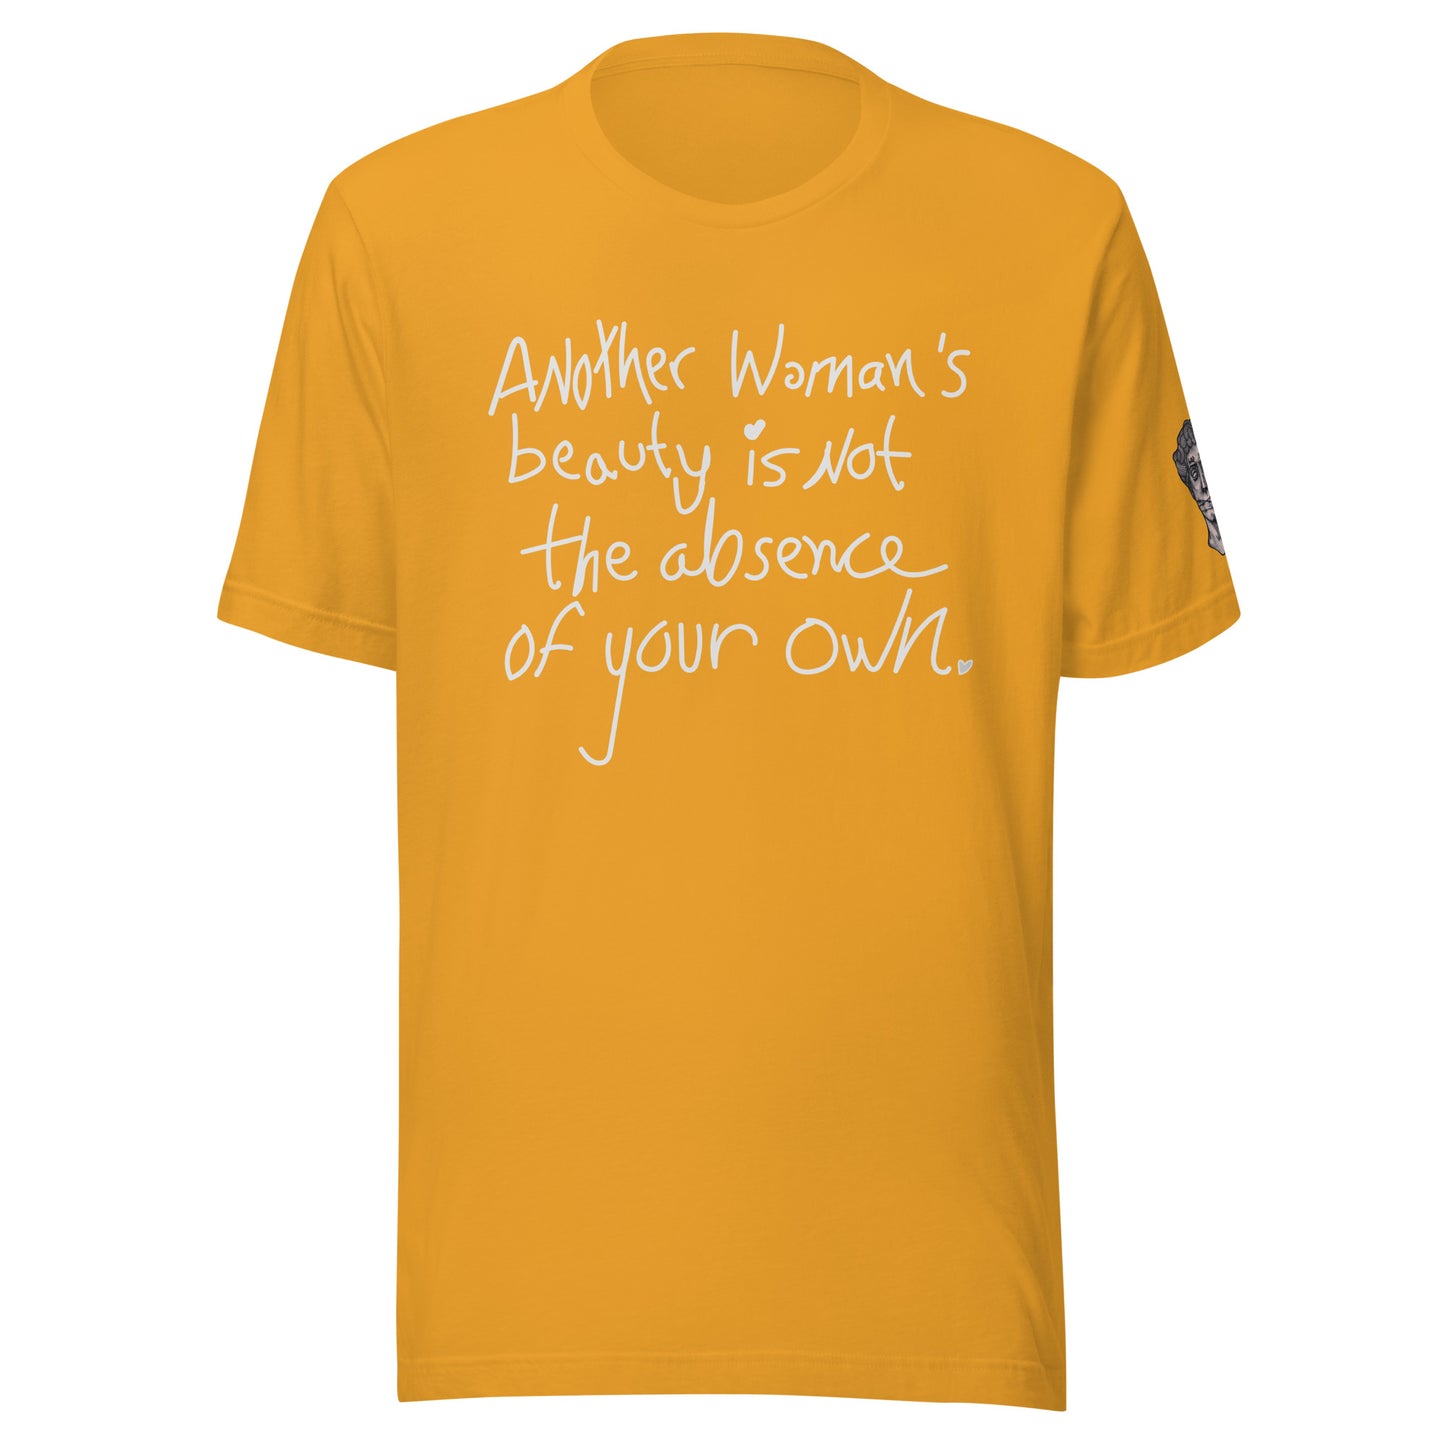 ANOTHER WOMAN'S BEAUTY (LIGHT FONT)